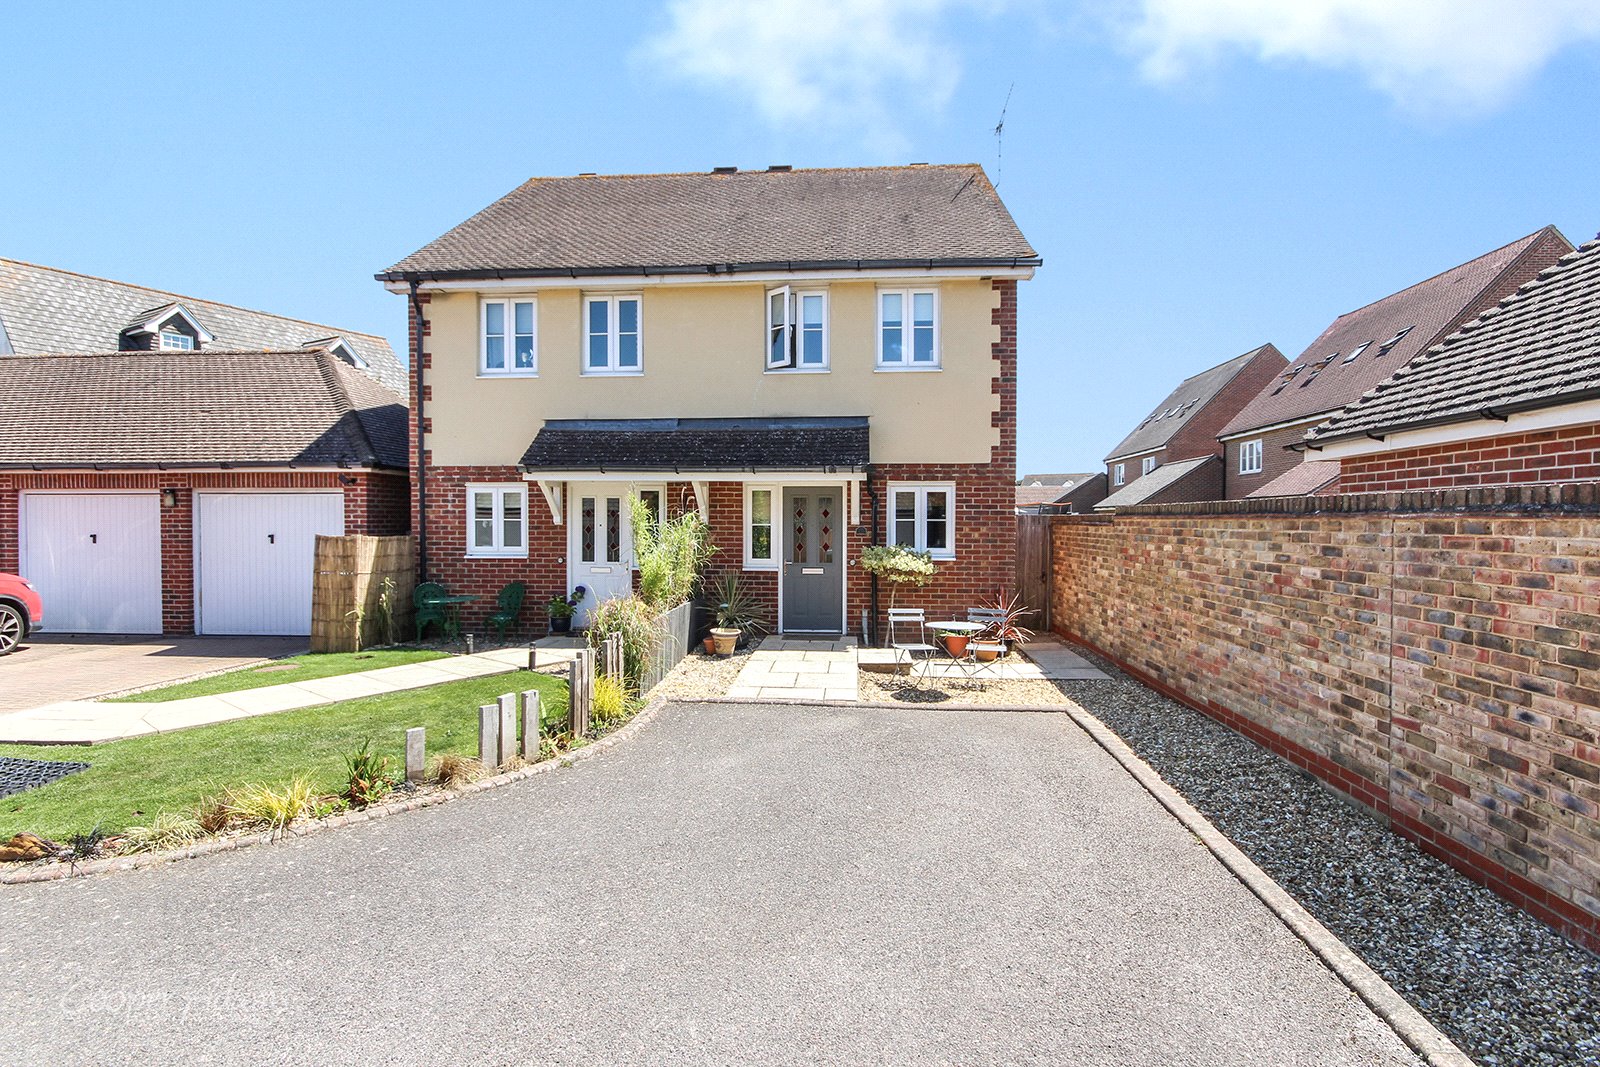 2 bed house for sale in Oakwood Drive, Angmering, BN16